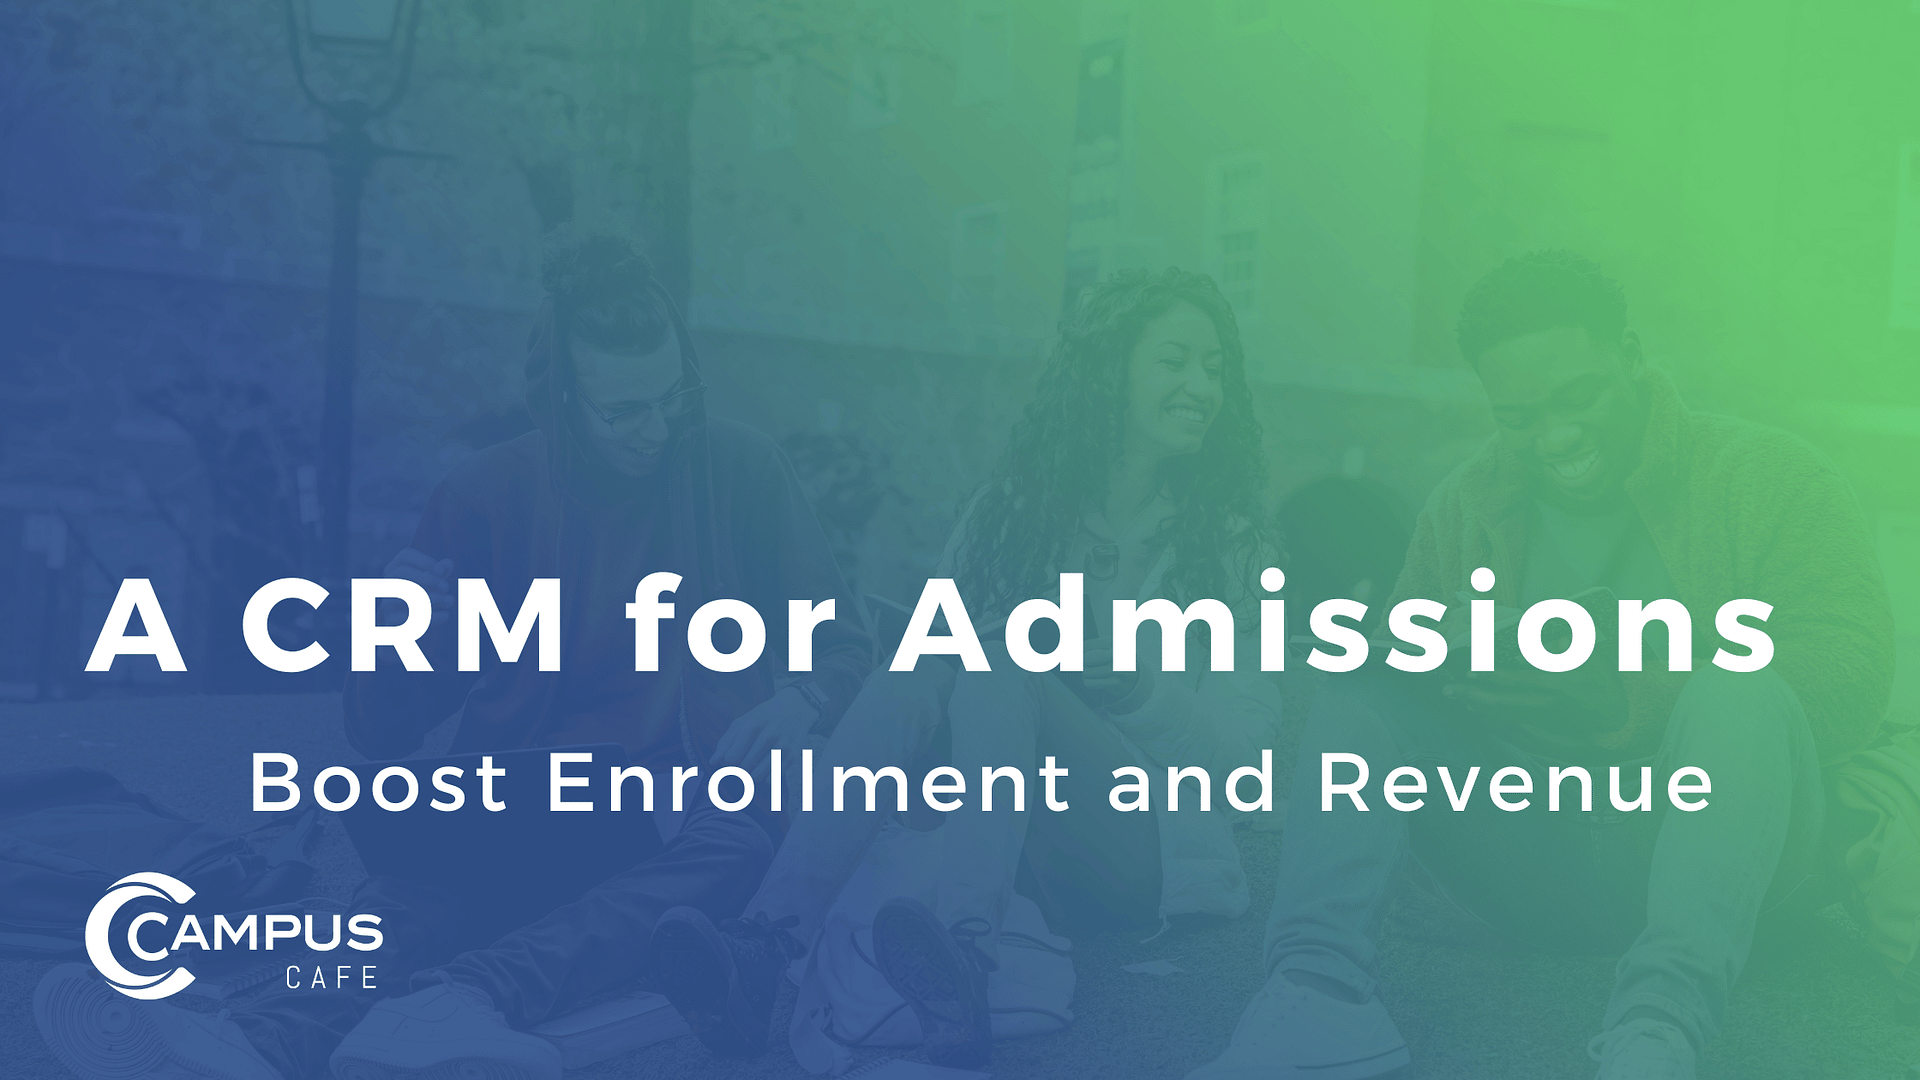 A CRM is a hub for all admissions and recruiting operations. It’s a centralized database to manage prospects, enrolled students and organizational data.